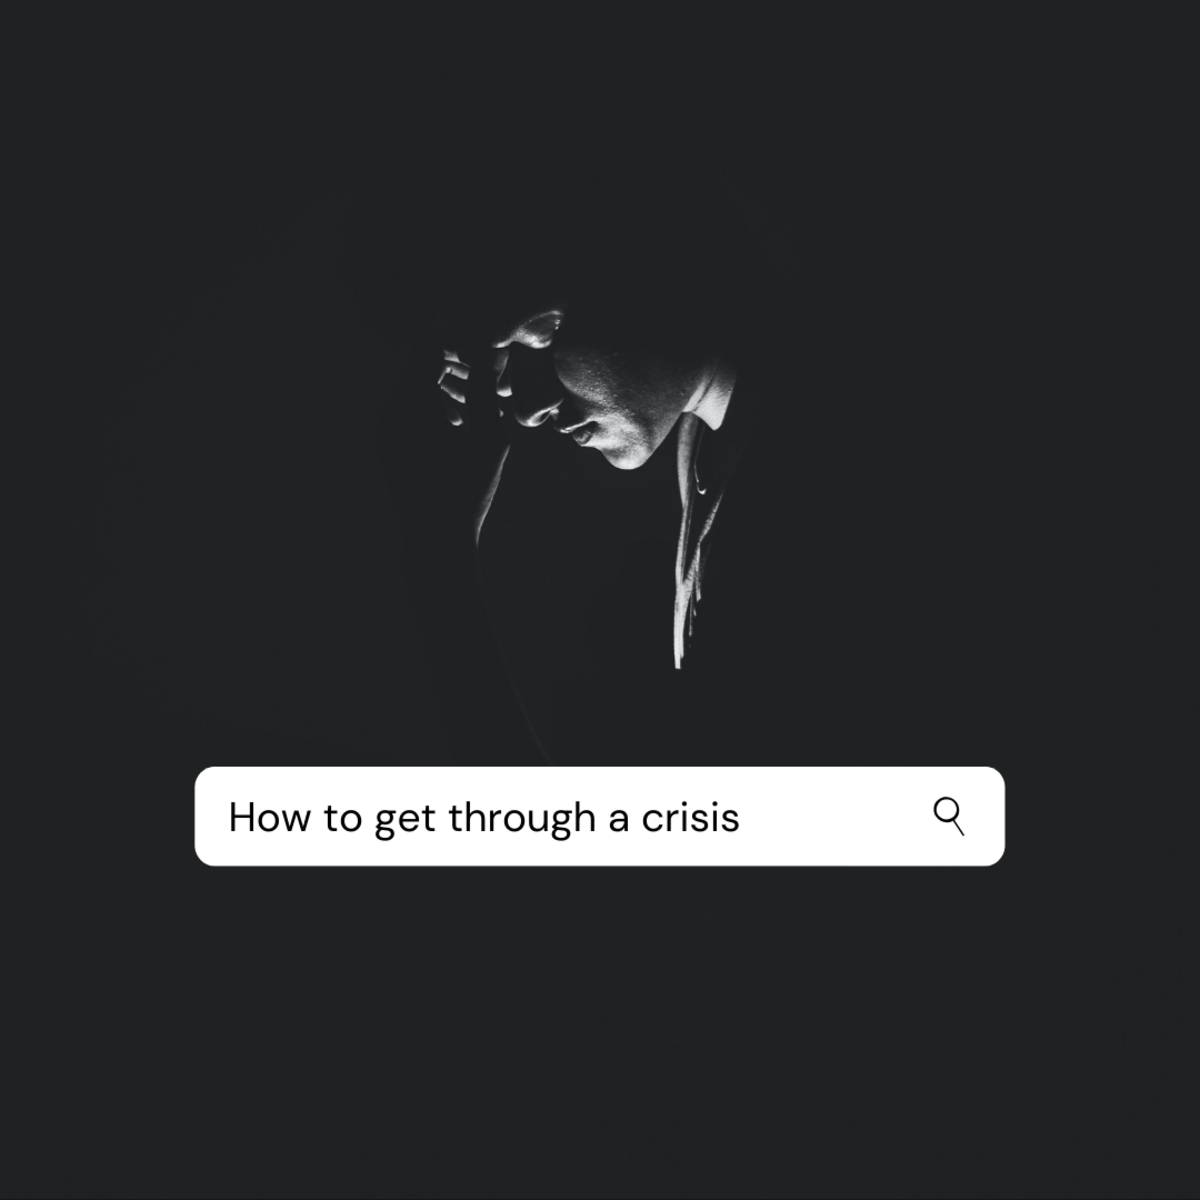 How does one get through a crisis?